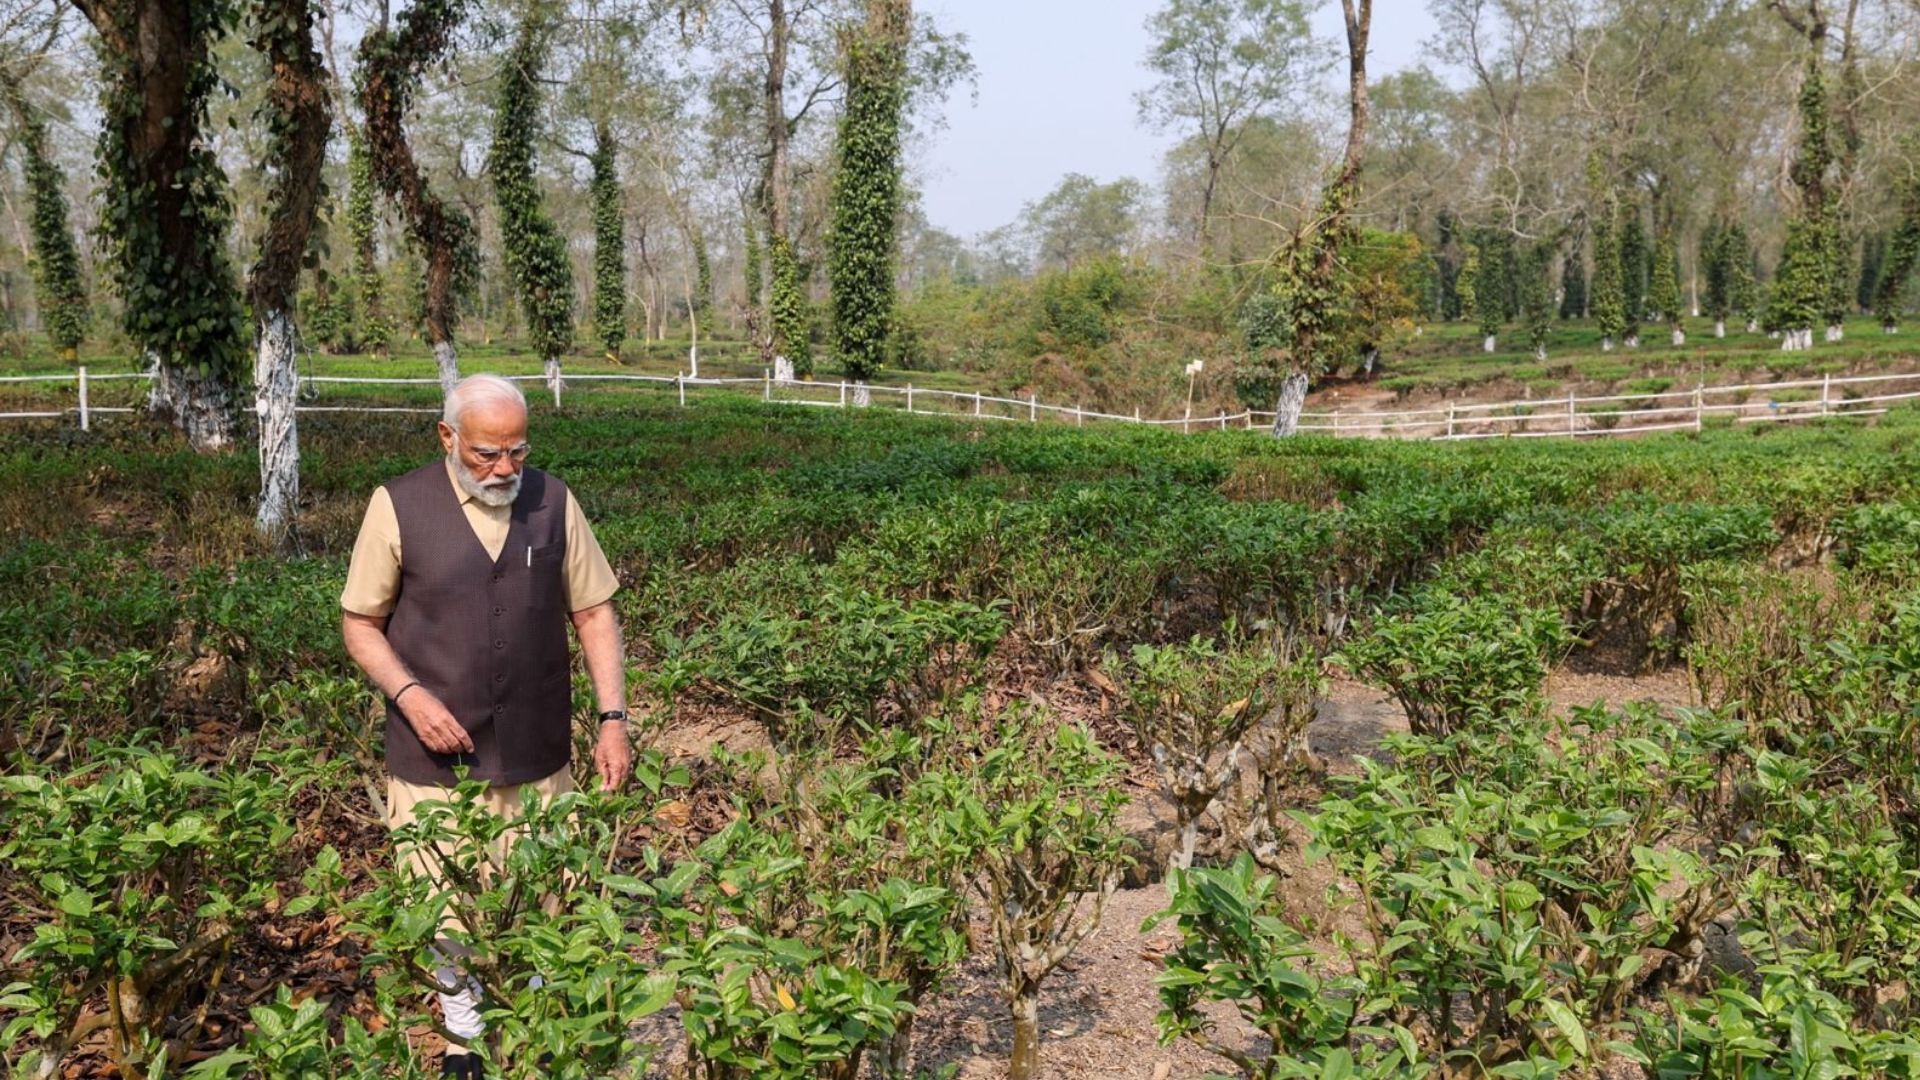 PM Modi spends time at tea garden in Assam, promotes tourism around it